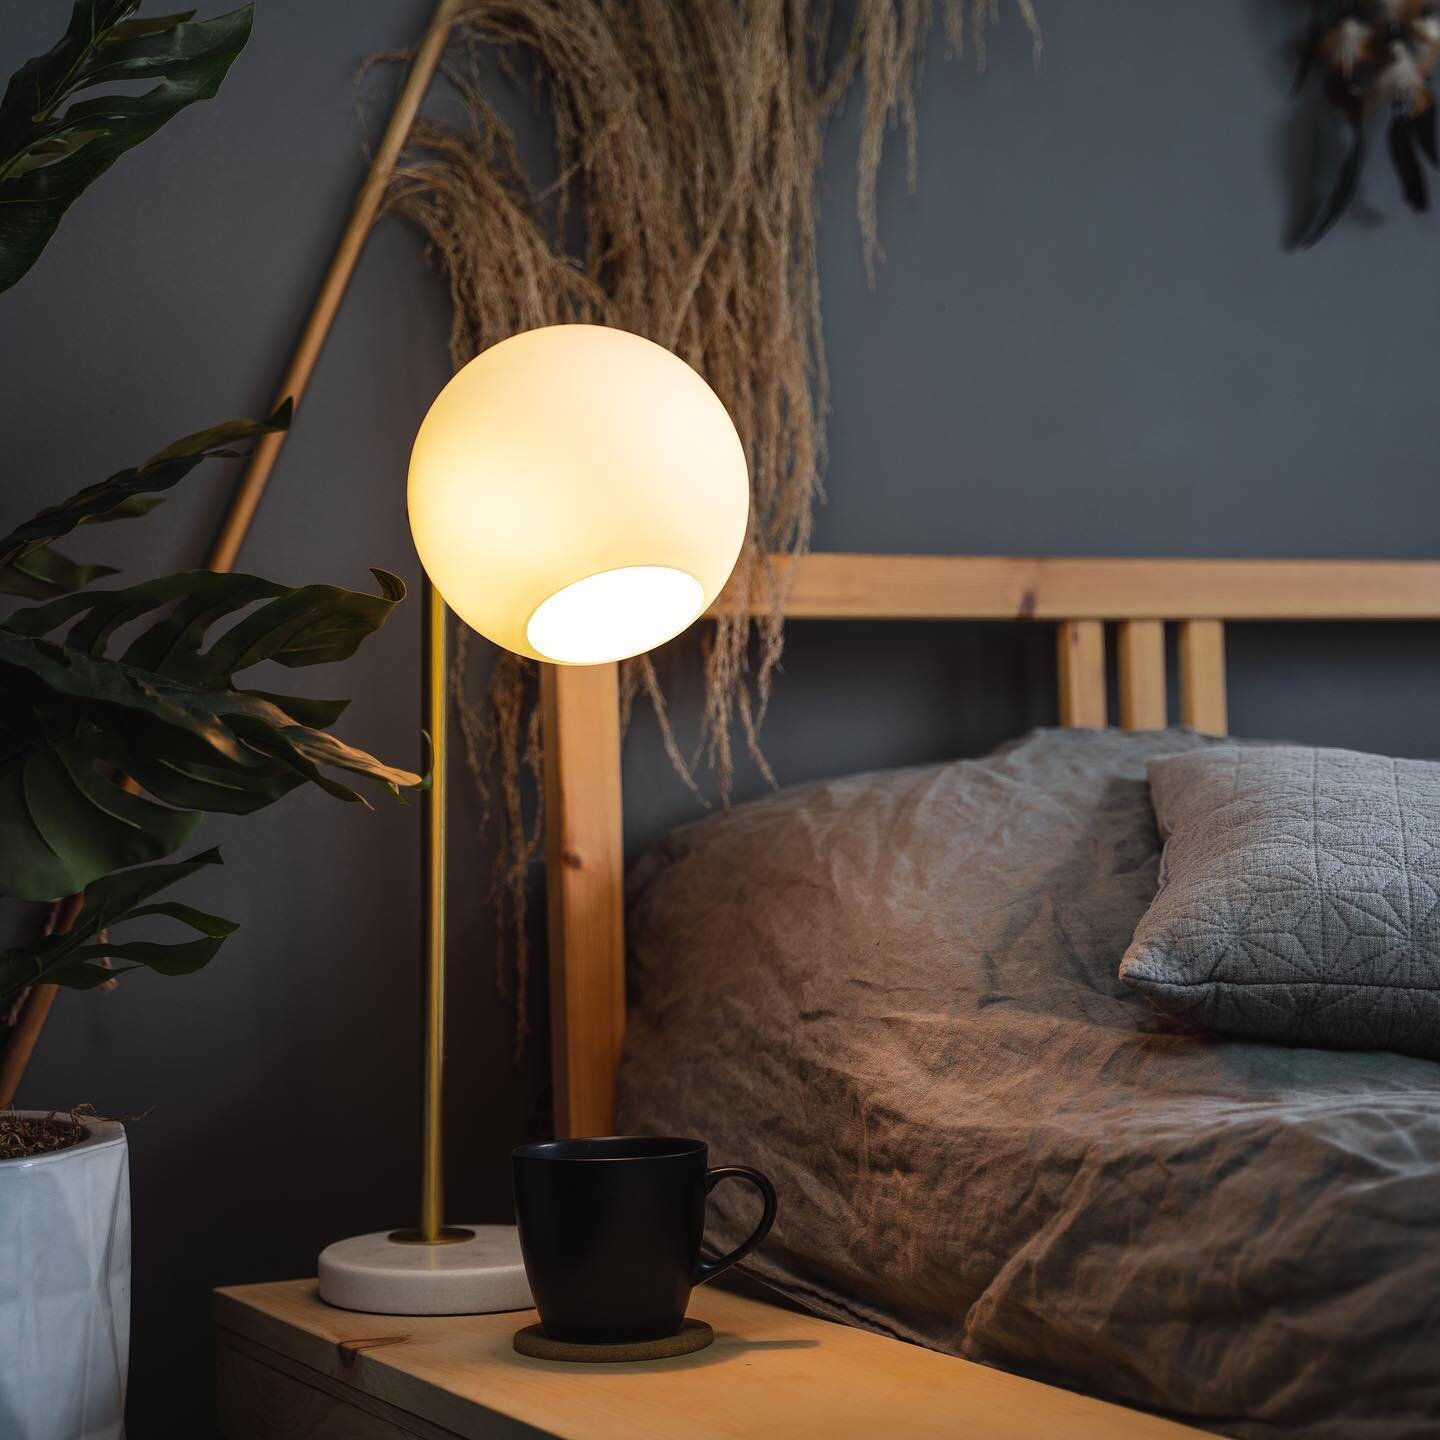 The warm light from Bedtime Bulb could help you get better sleep. Cut out blue light before bed. Switch to Bedtime Bulb today 💡

#restful #investinrest #sleepmatters #bedtimebulb #sleephealth  #reading #nighttime #bed #insomnia #routine #goodmorning